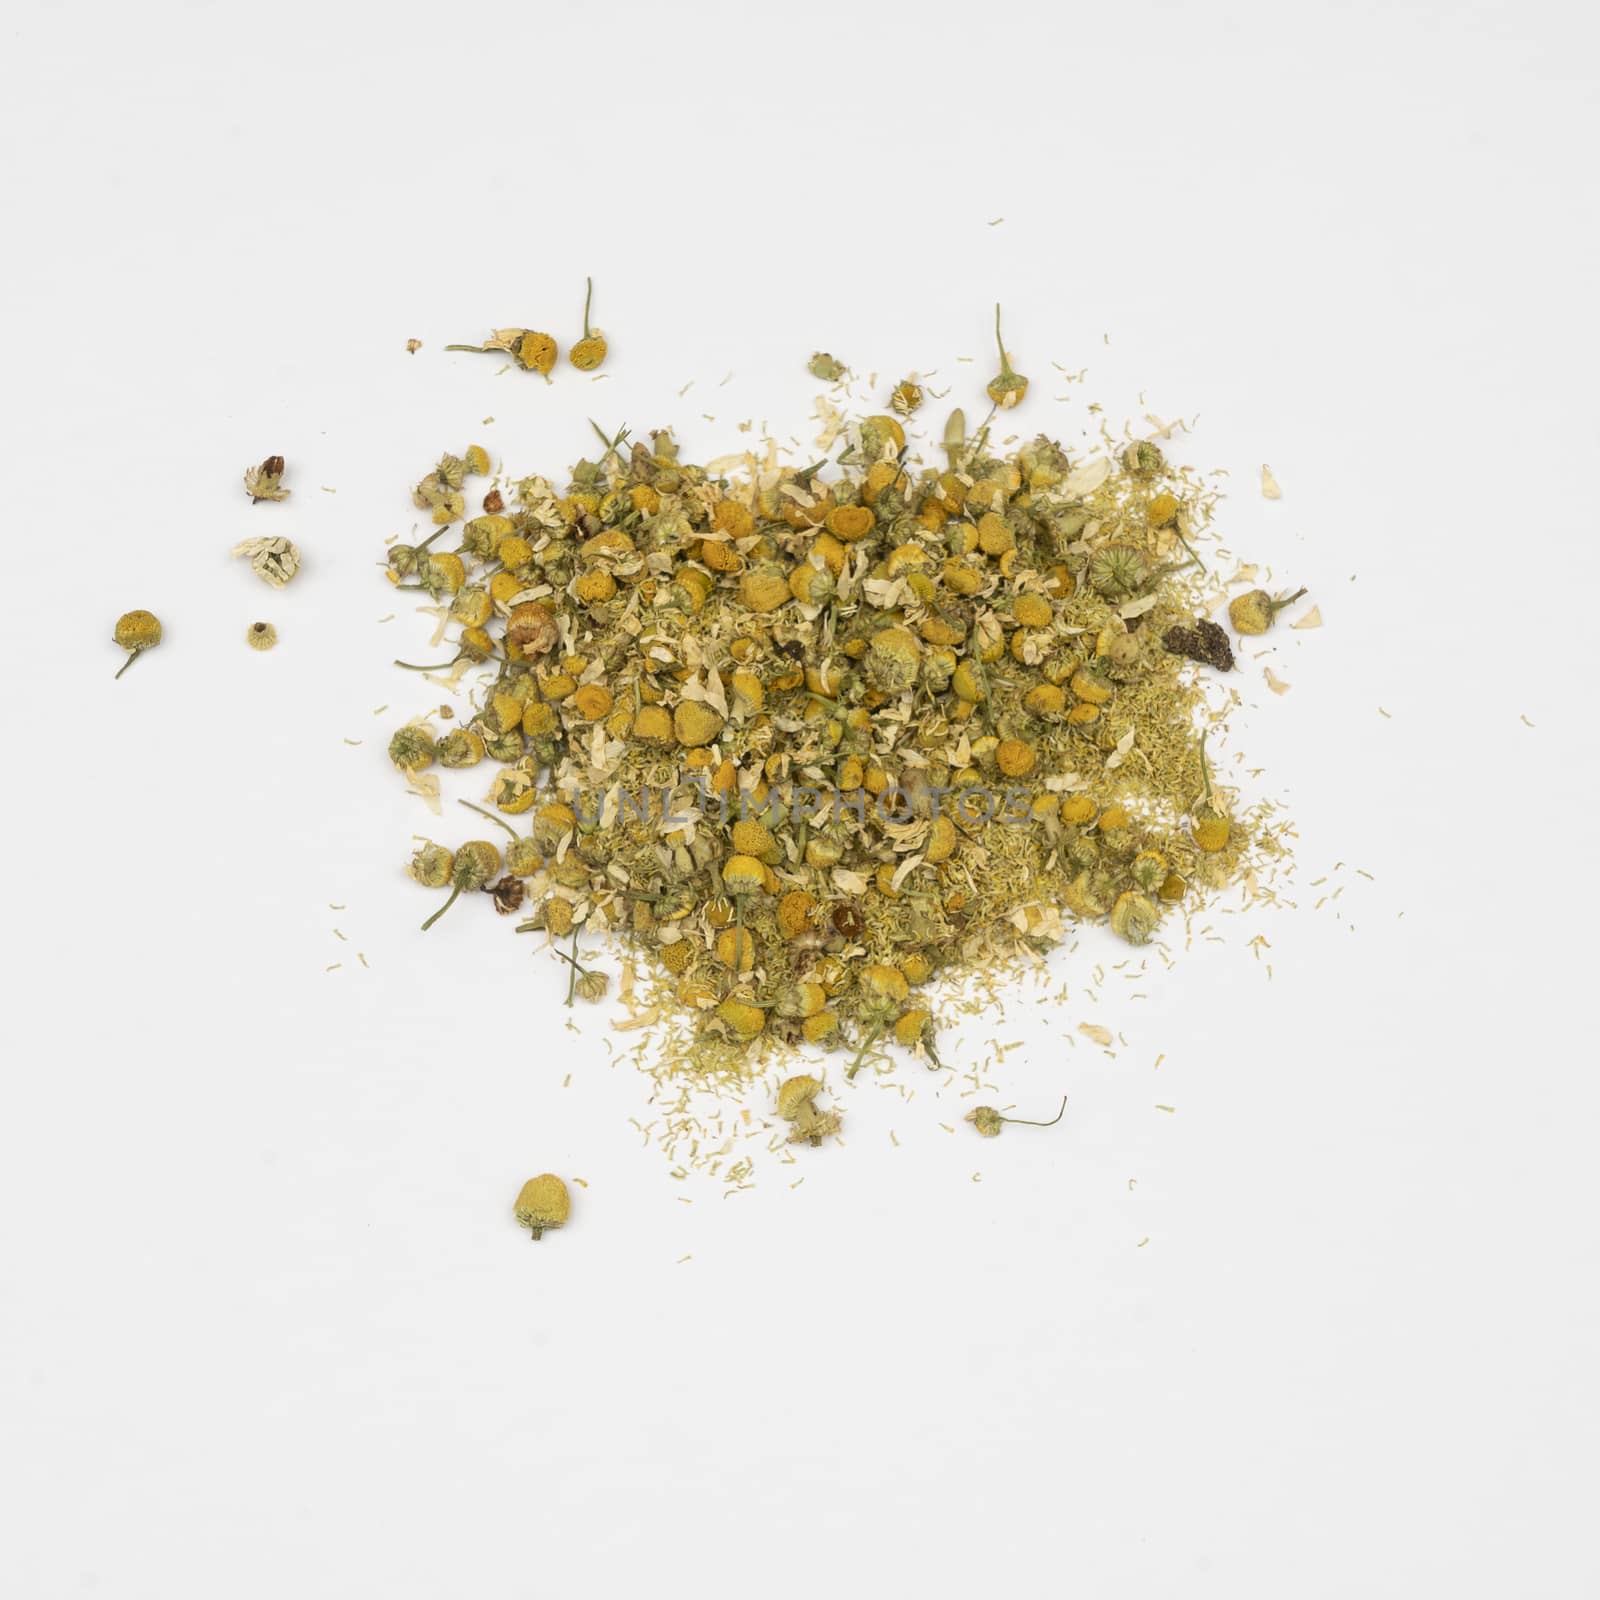 dried chamomile flowers in a white table